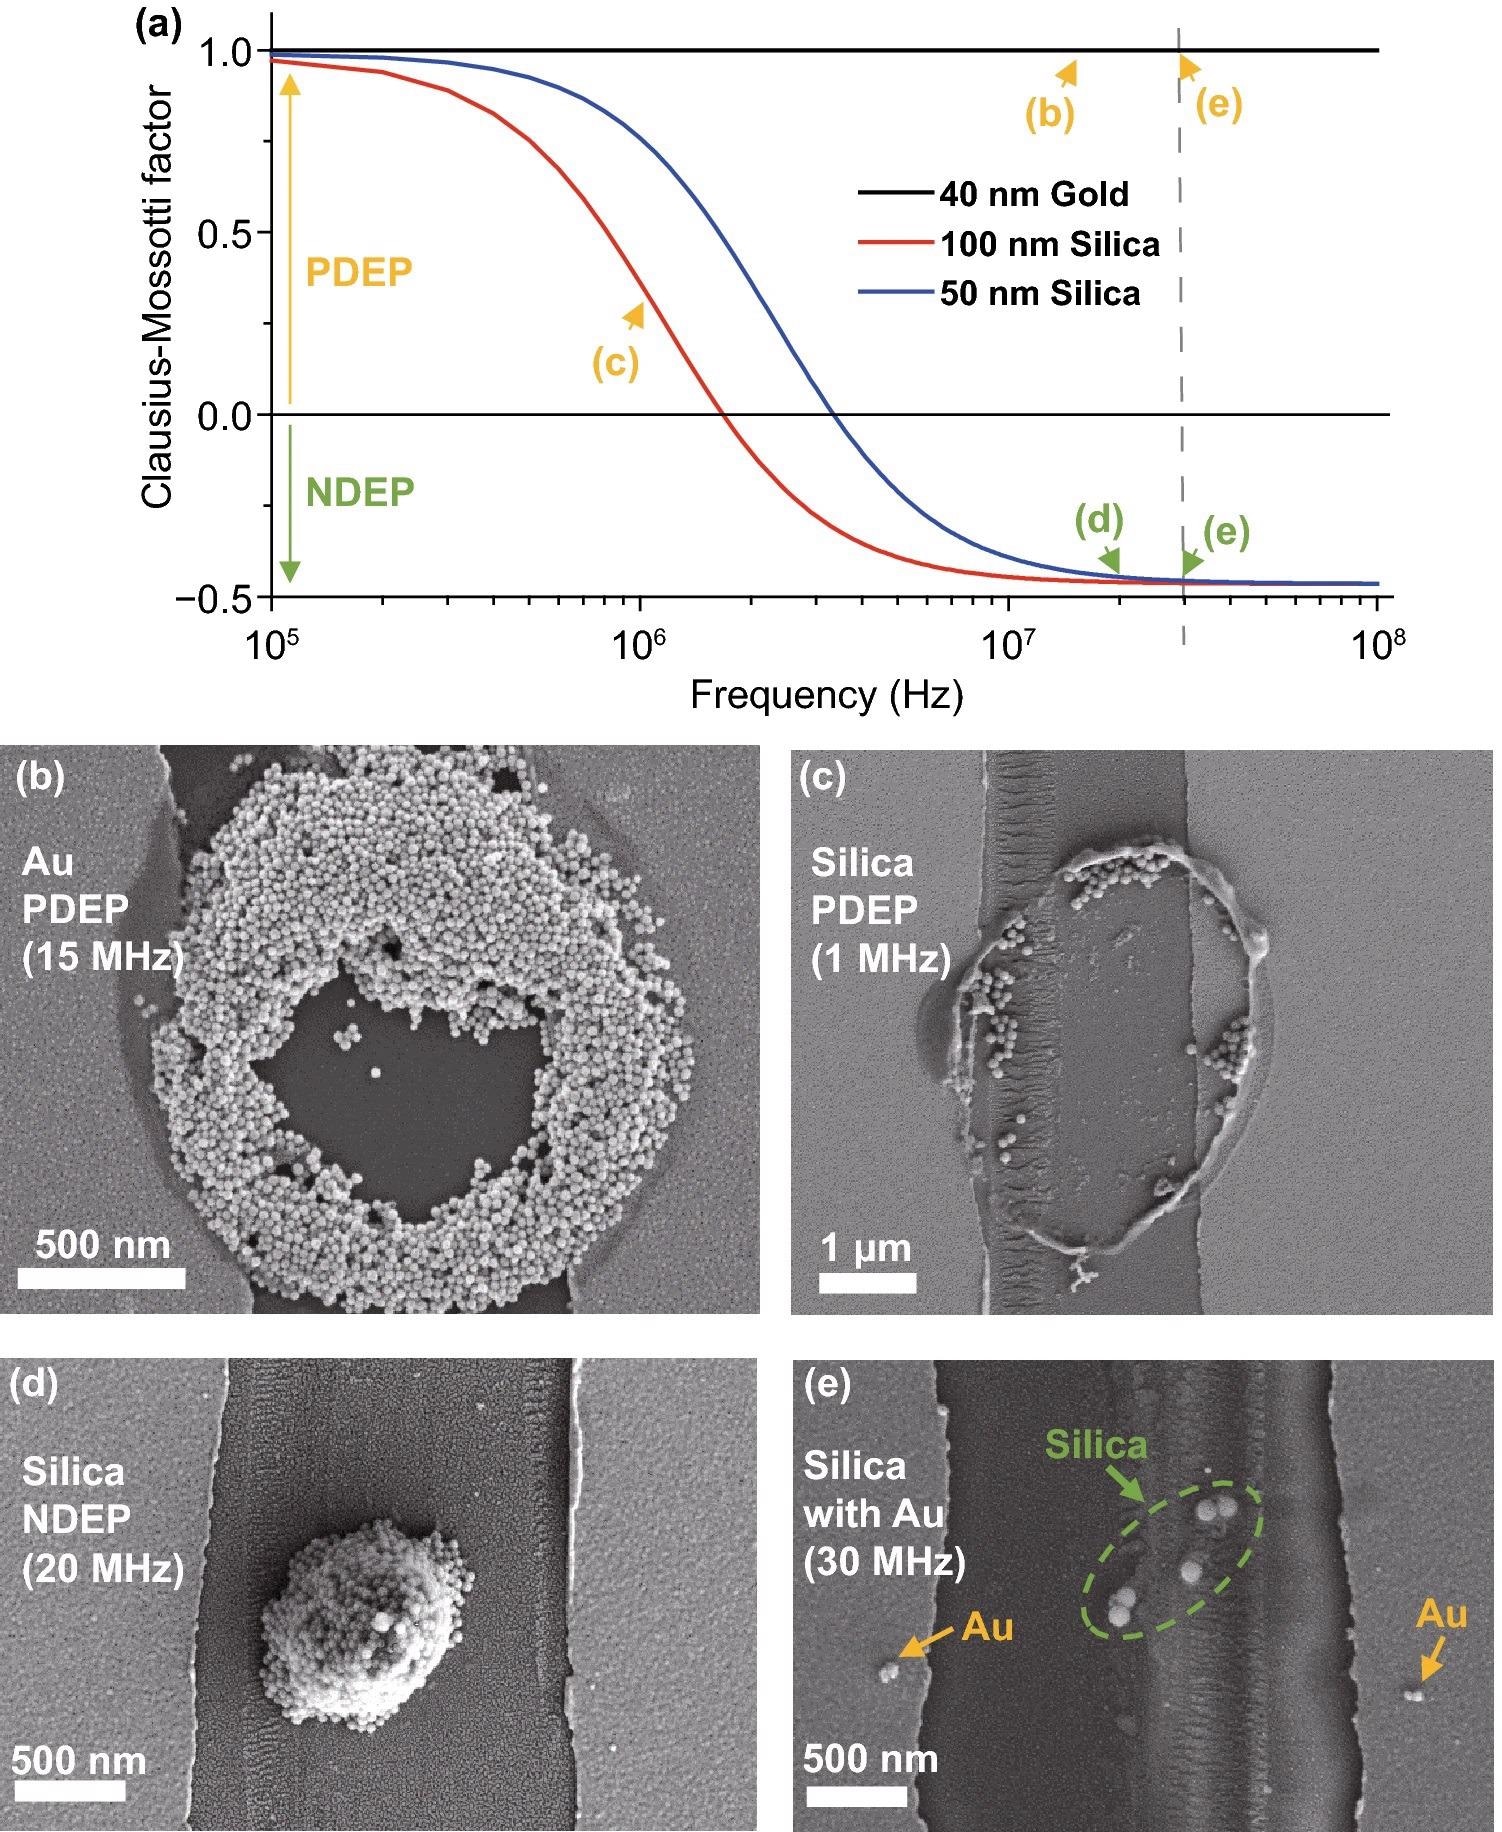 SEM images of PDEP and NDEP experiments. (a) Clausius–Mossotti factor (fCM) of nanoparticles used for experiments. Several characteristics (em/p, sm/p, sbulk, Ks) of Au and silica nanoparticles are from reference. The X-axis is a log scale of the frequency (Hz). Signs of fCM change at ~2 MHz (100 nm silica), ~4 MHz (50 nm silica), and fCM of 40 nm Au always has a plus sign in the 0.1–100 MHz range. Arrows show the frequencies used, and colors indicate PDEP (yellow) or NDEP (green). (b) PDEP result of Au nanoparticles with 40 nm diameter Au nanoparticles, ~2 µm diameter pipette with Rinner/Router ratio = 0.7,